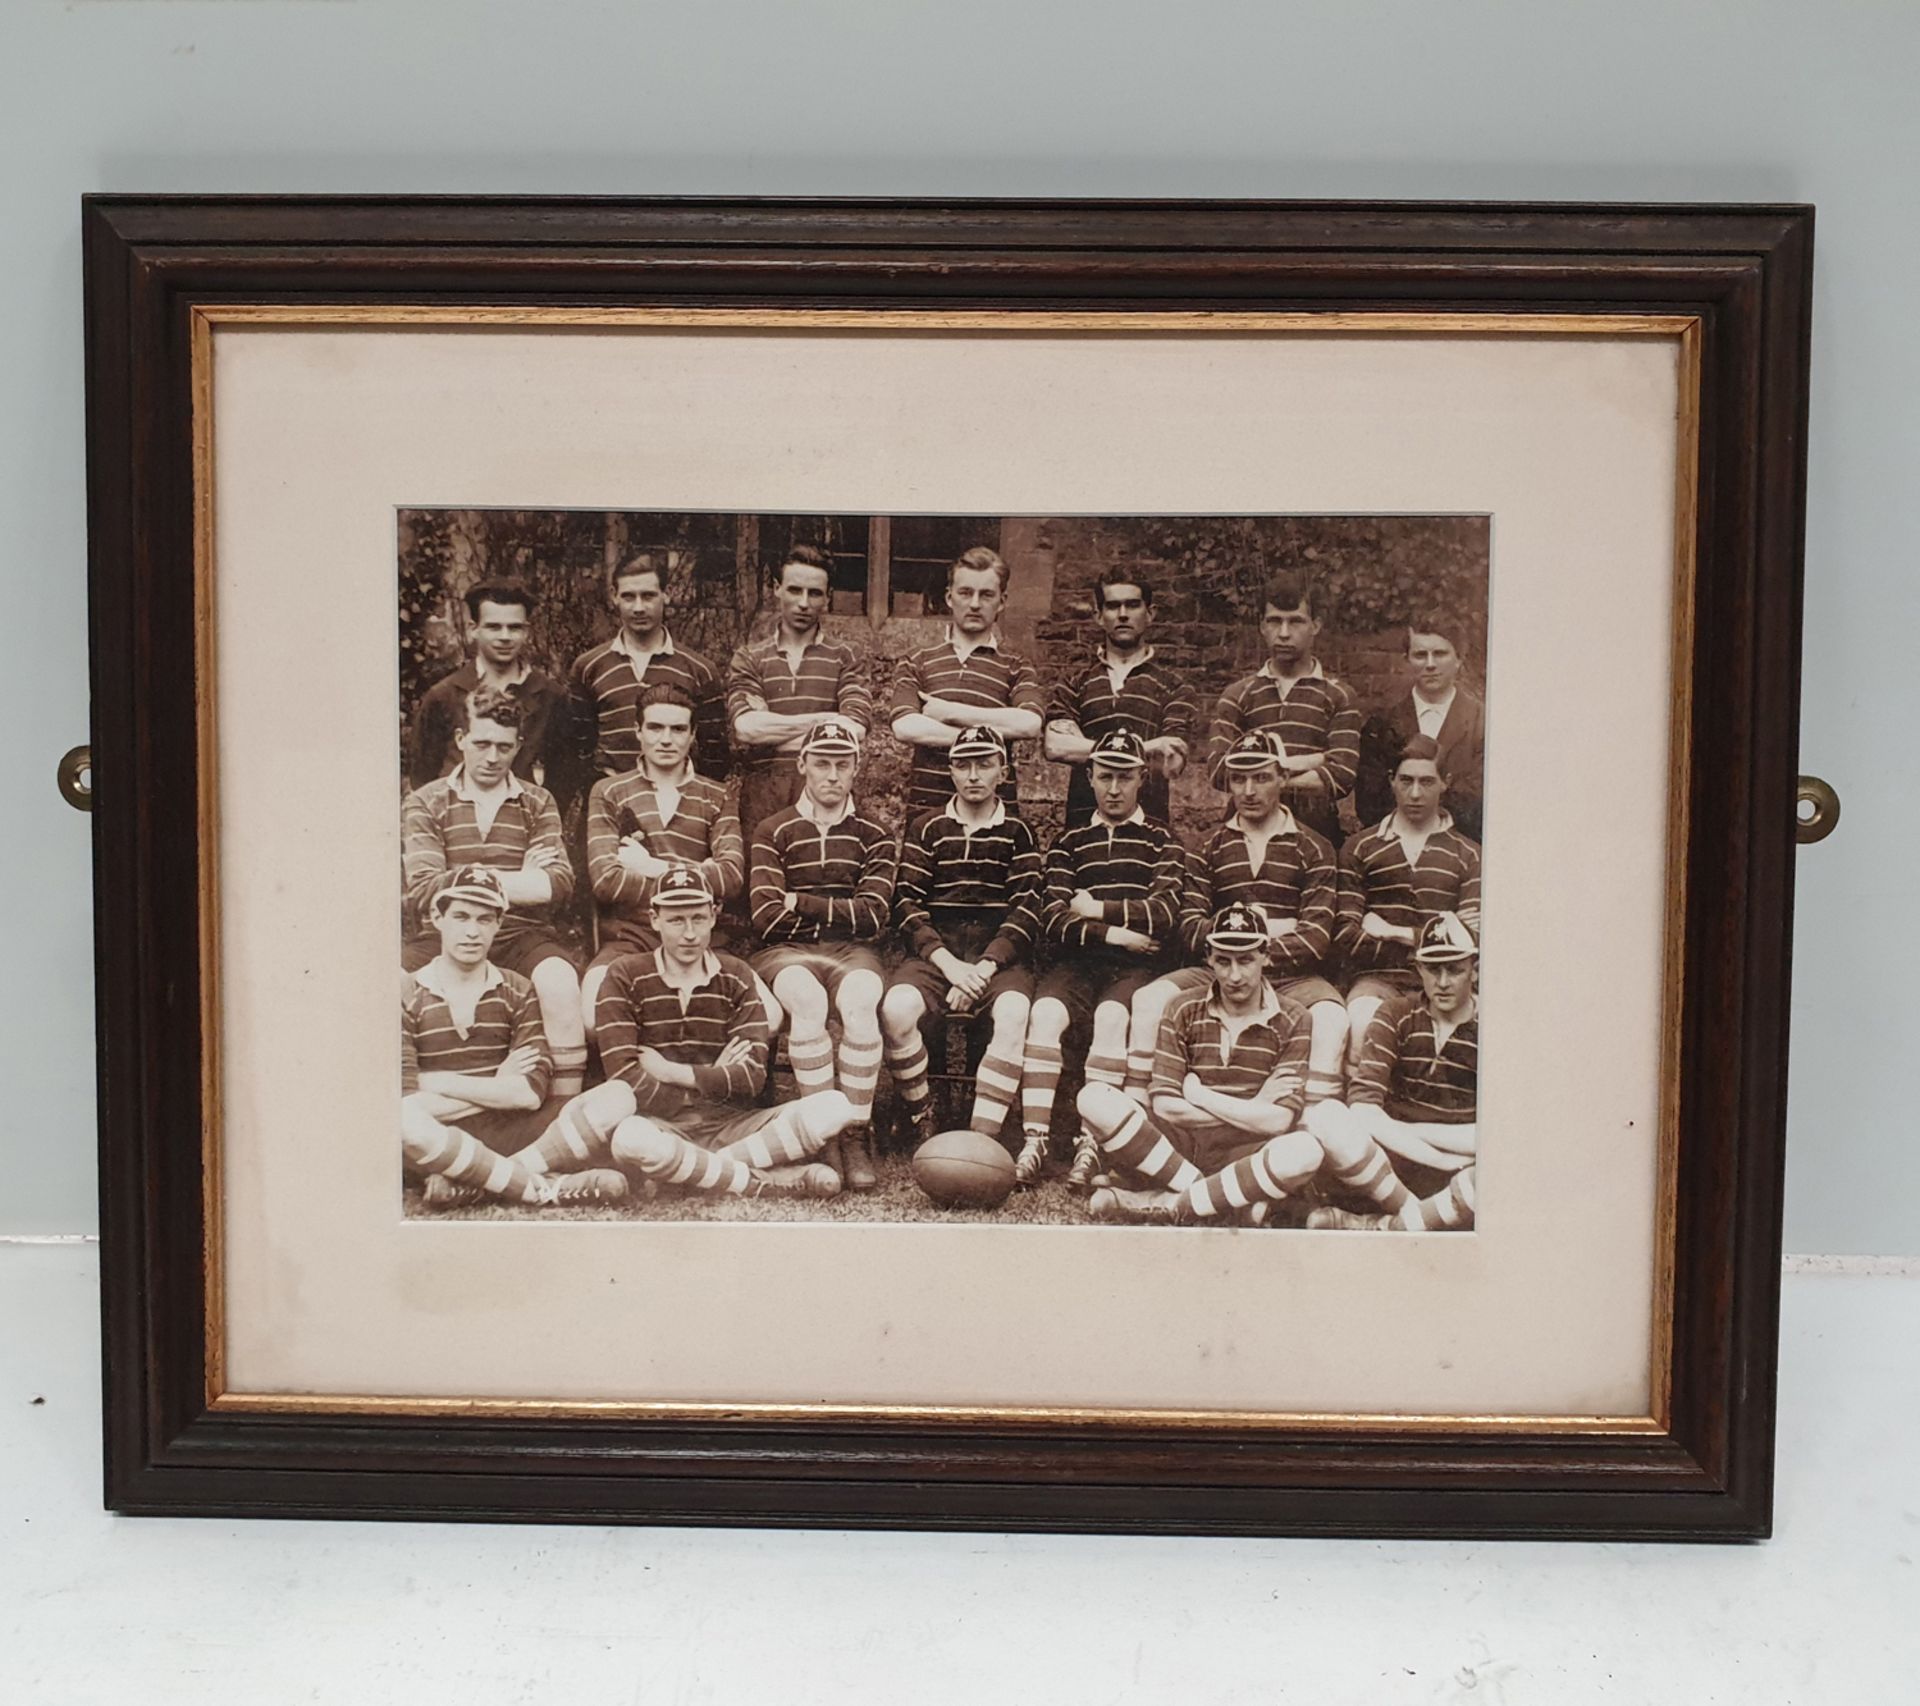 Framed Rugby Team Picture. Approx Dimensions 18 1/2" x 14 1/2".